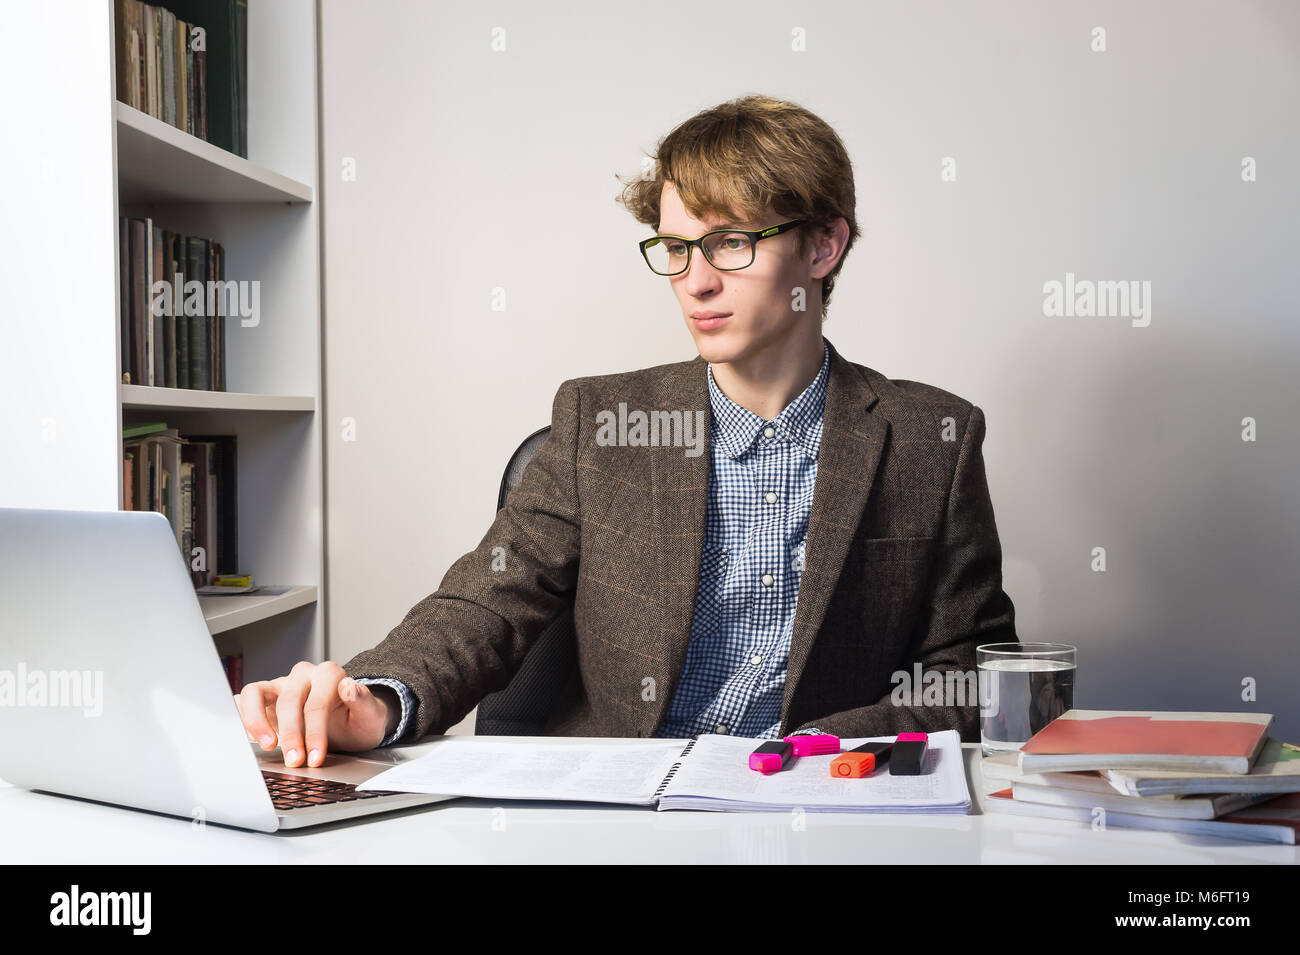 Handsome young person in reading eyeglasses at modern minimalistic workplace. Young male student works with books and laptop on home assignment or pro Stock Photo